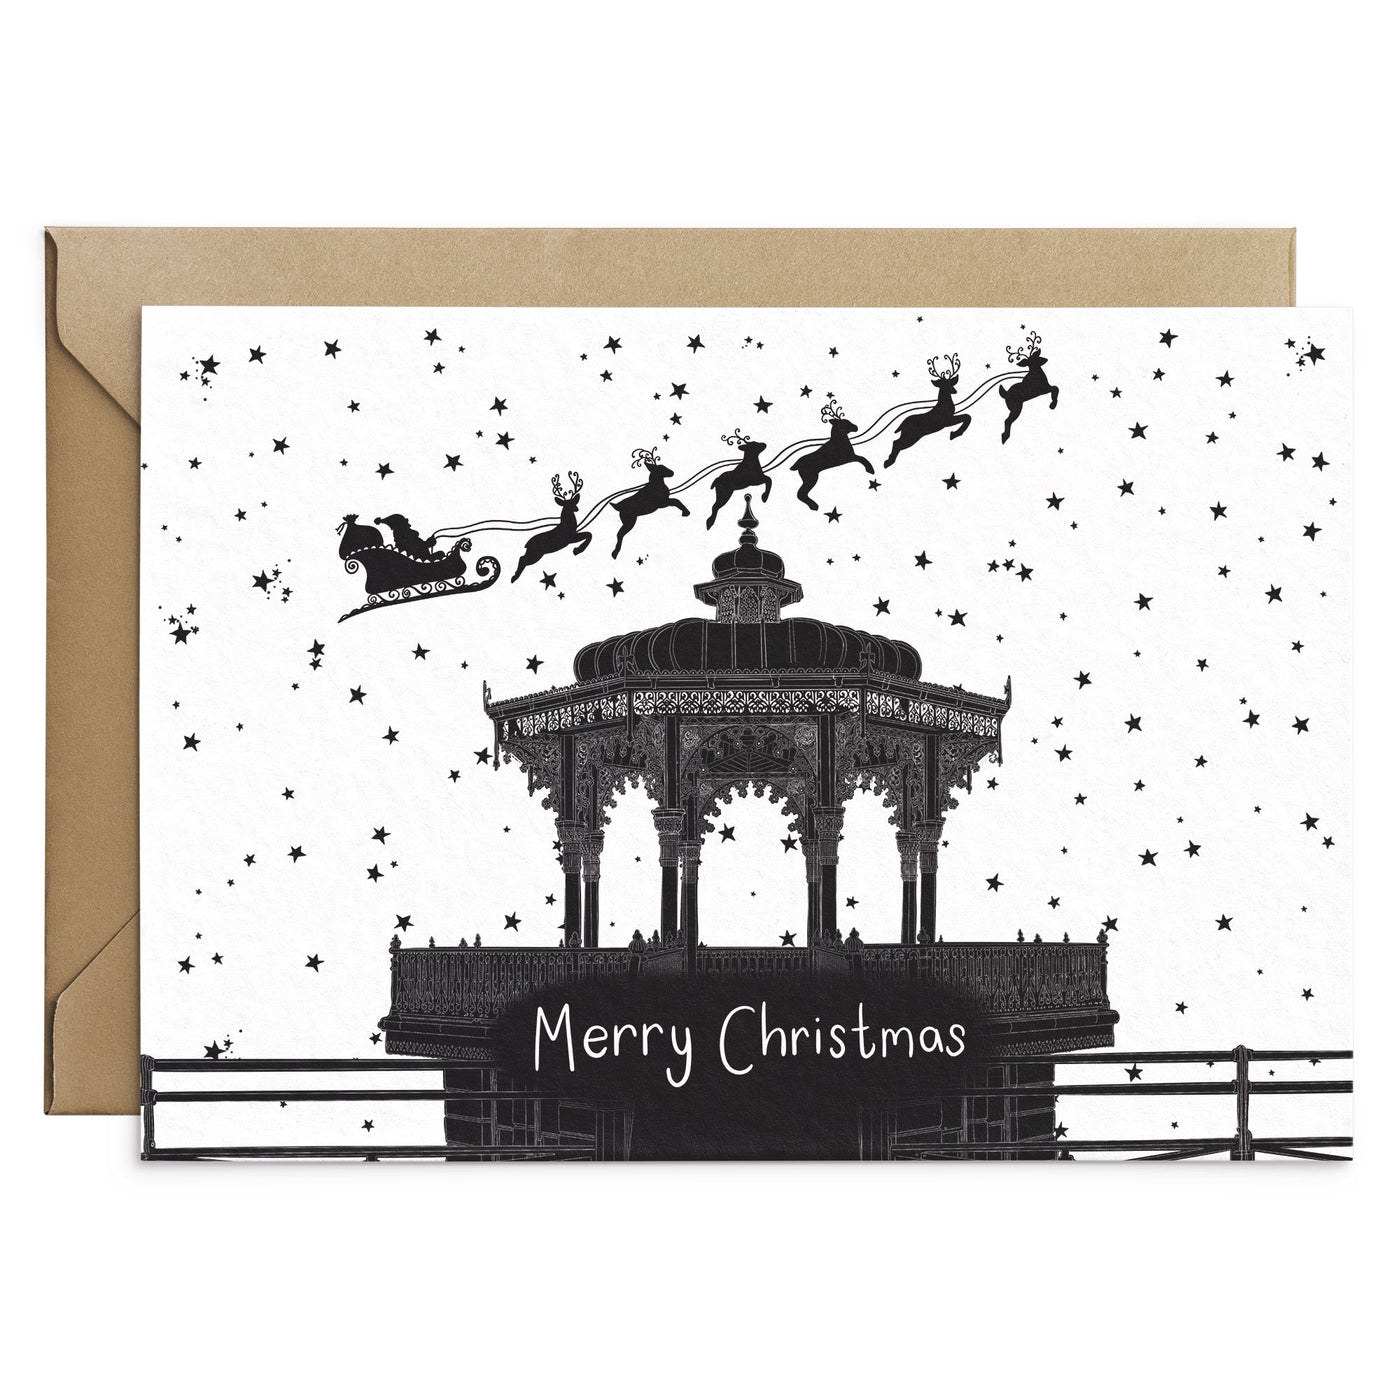 Brighton Bandstand Christmas Card - Poppins & Co.